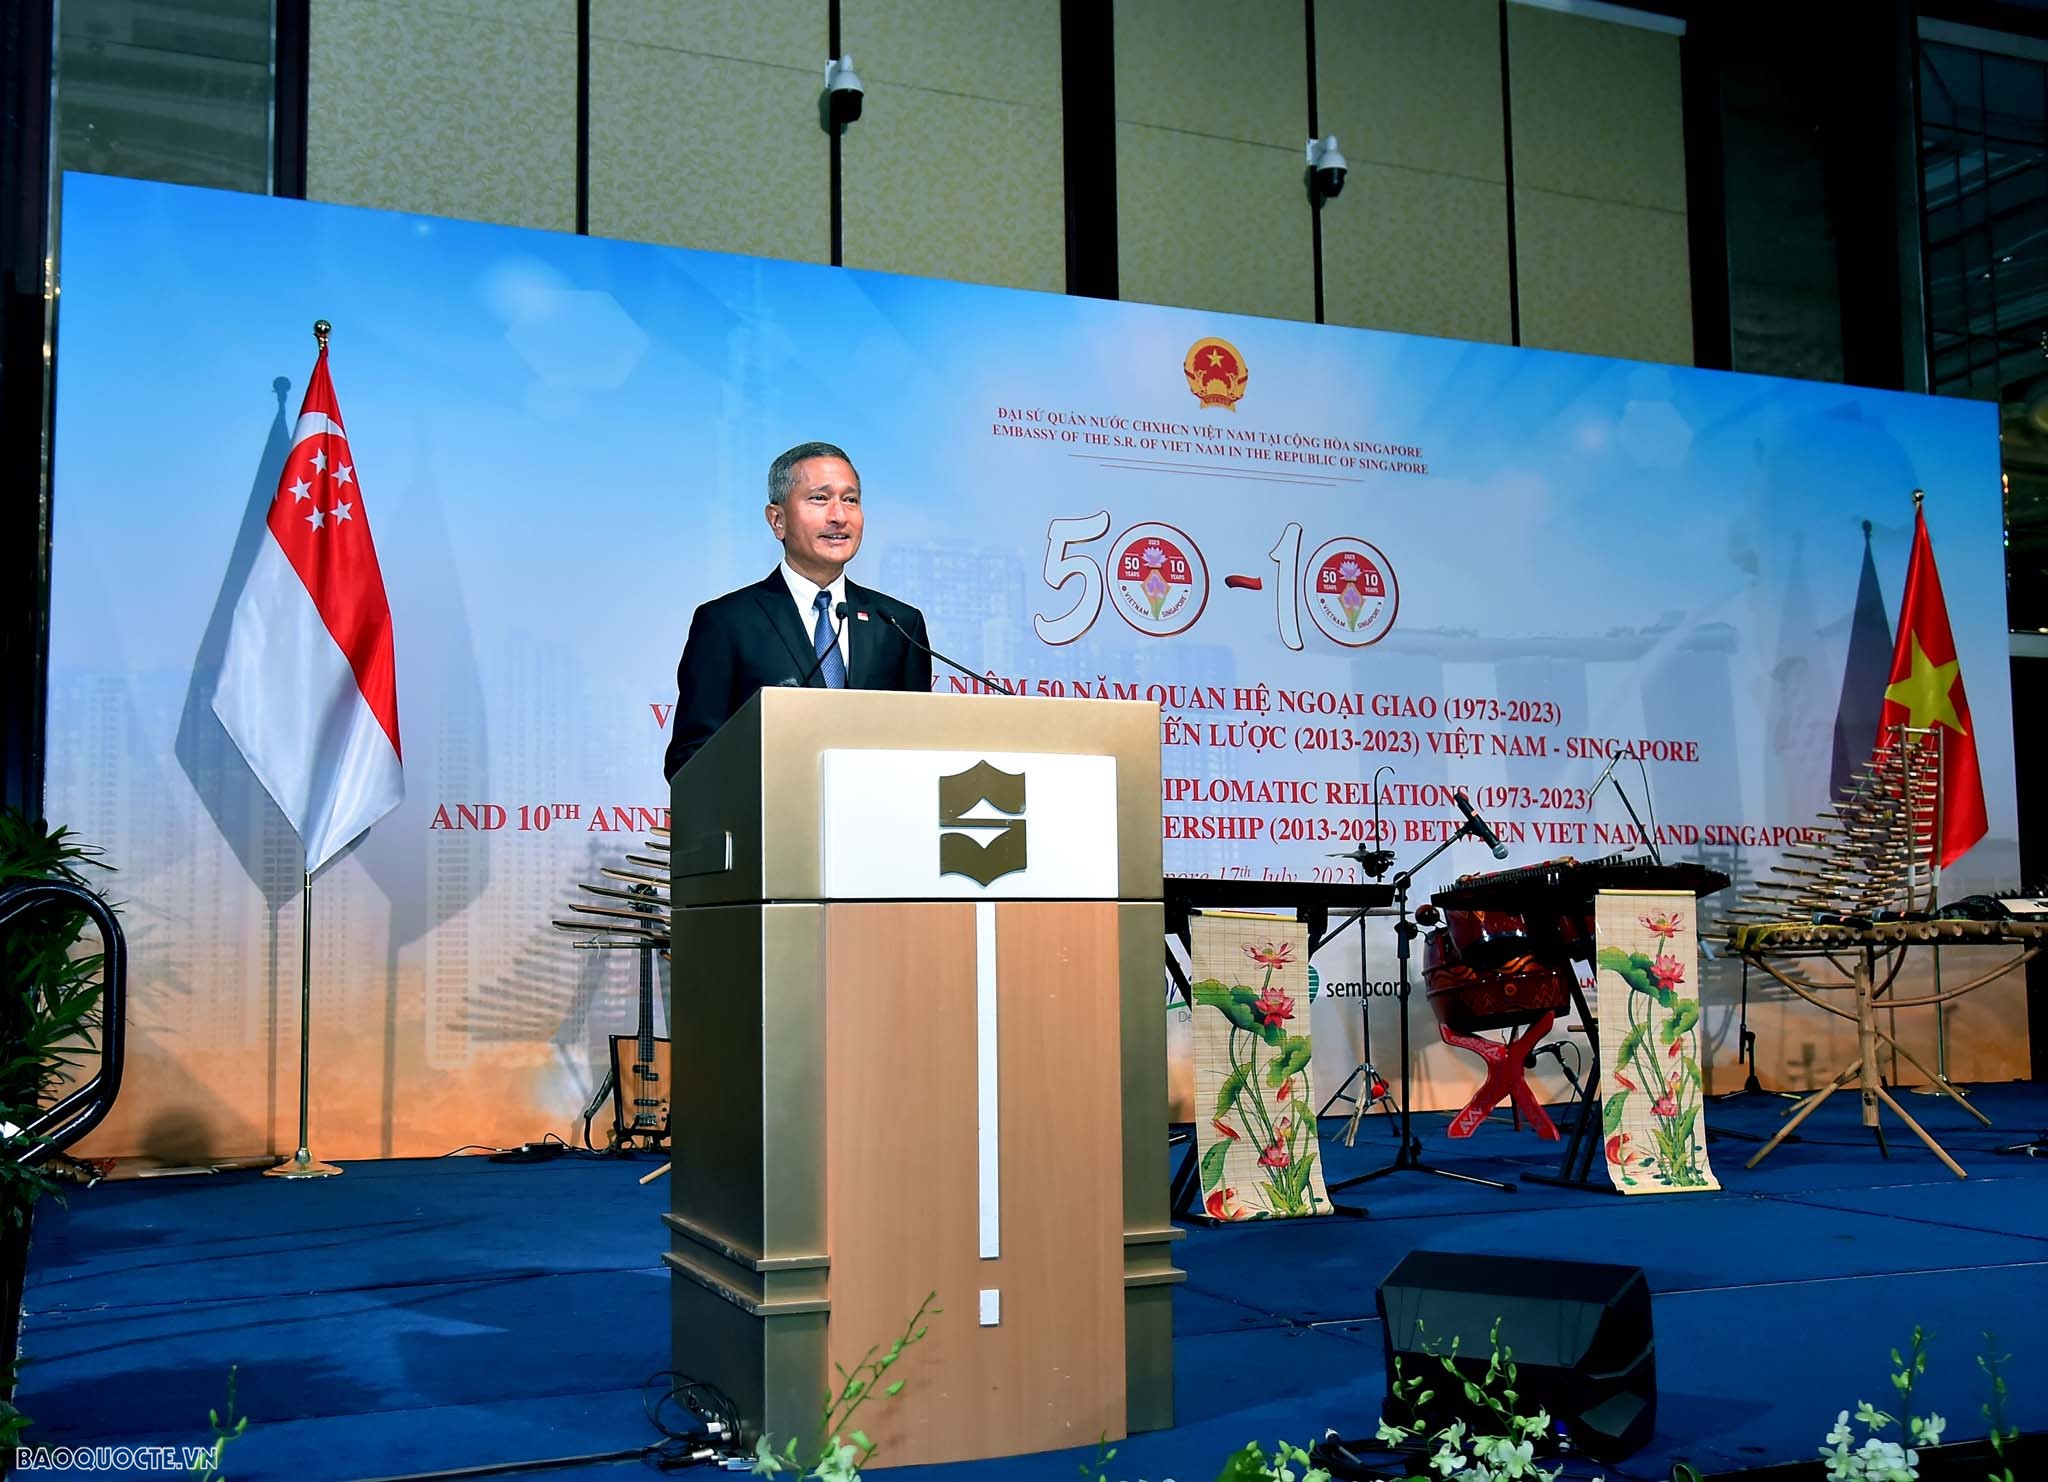 Vietnam, Singapore FMs attended ceremony marking 50th anniversary of diplomatic ties